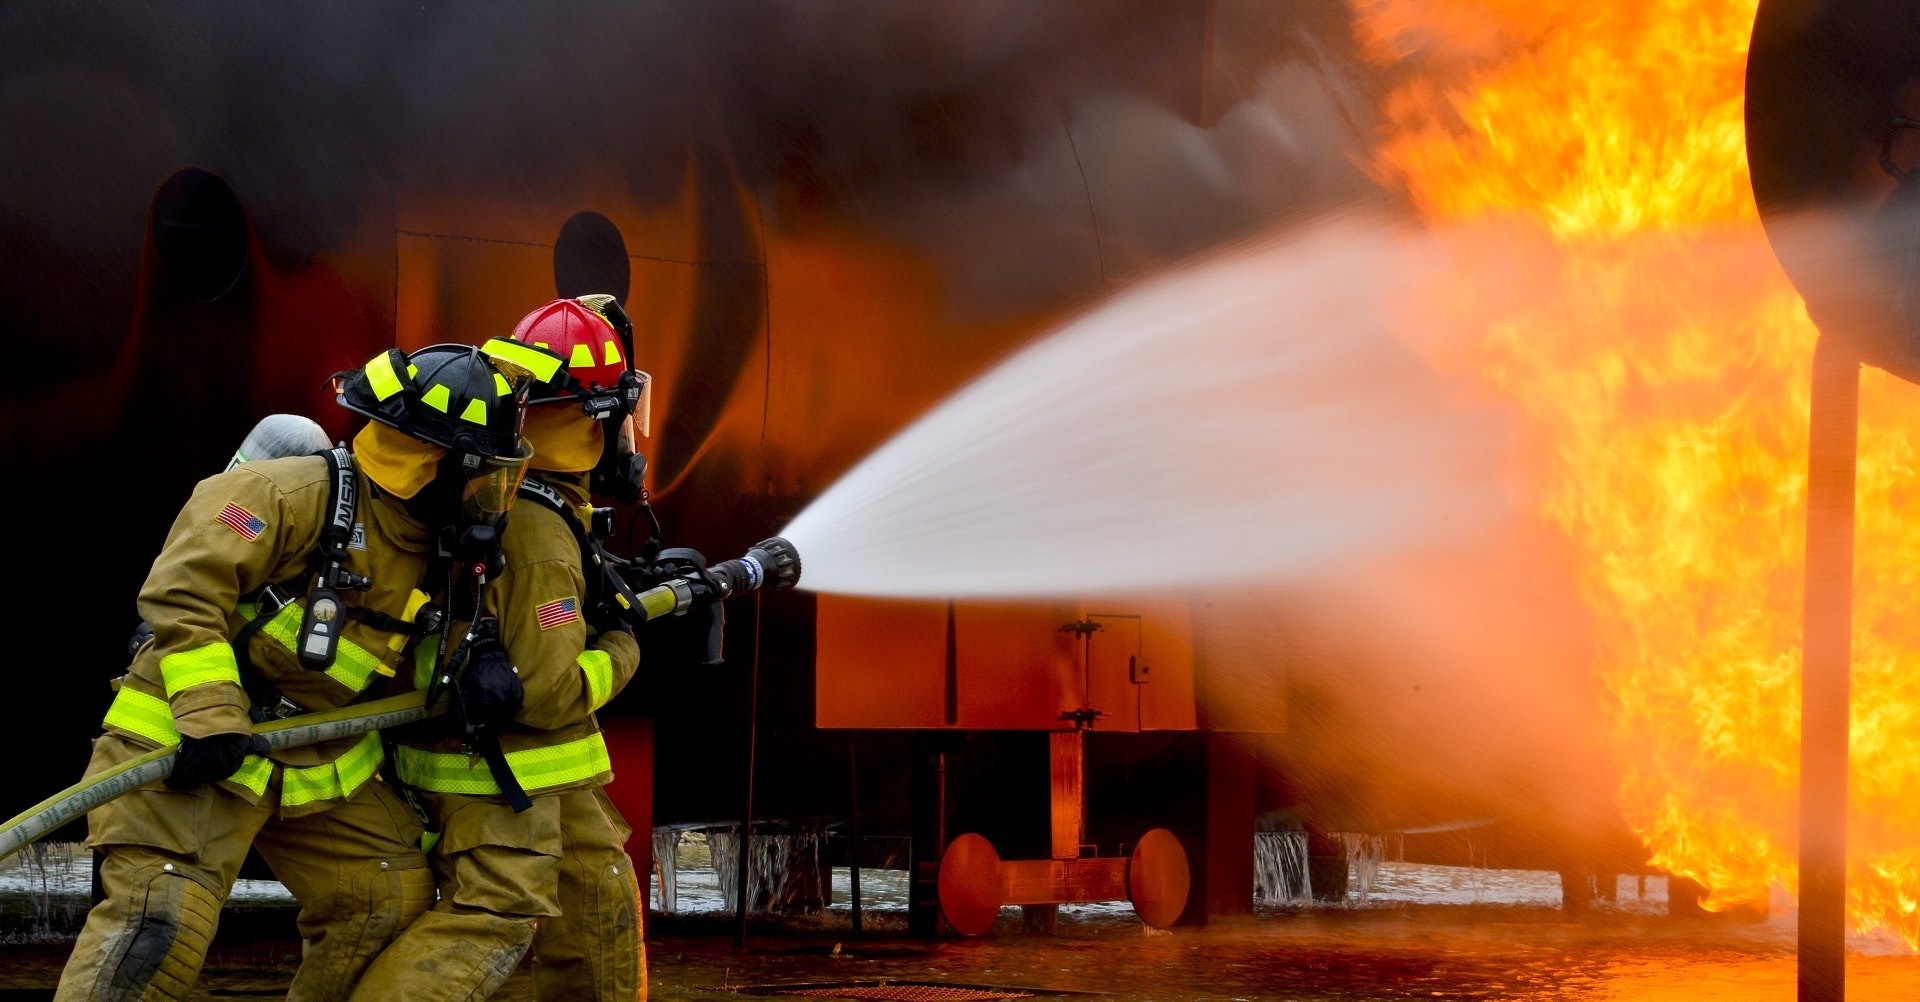 Crisis Communications For First Responders